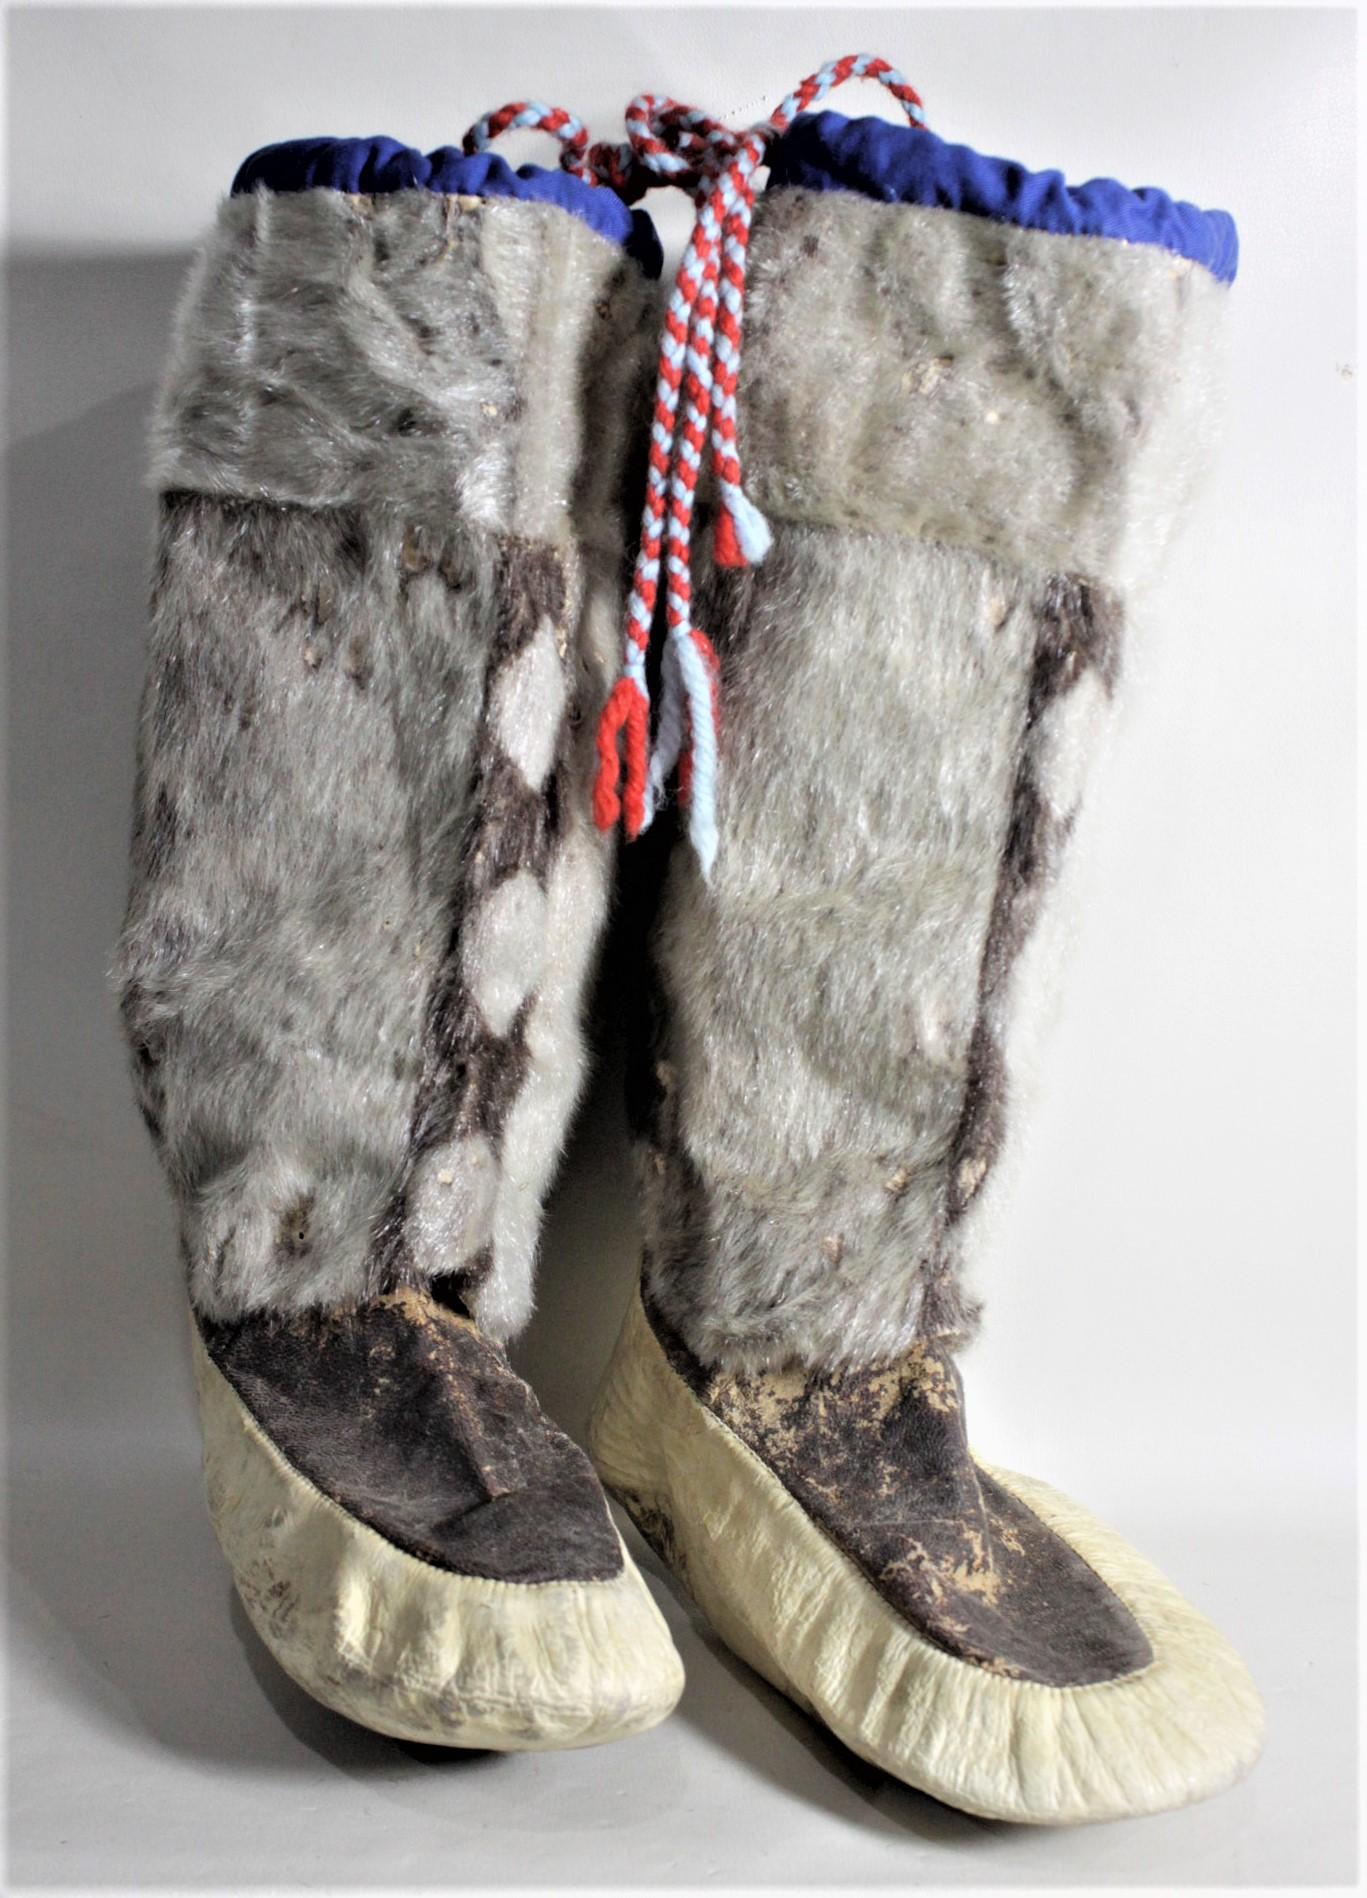 This pair of vintage Inuit mukluks are presumed to have been made in Canada in circa 1950 in the Indigenous American Folk Art style. The upper portions are made with fur and the bottom or 'boot' is composed of leather. There are wool ties done in